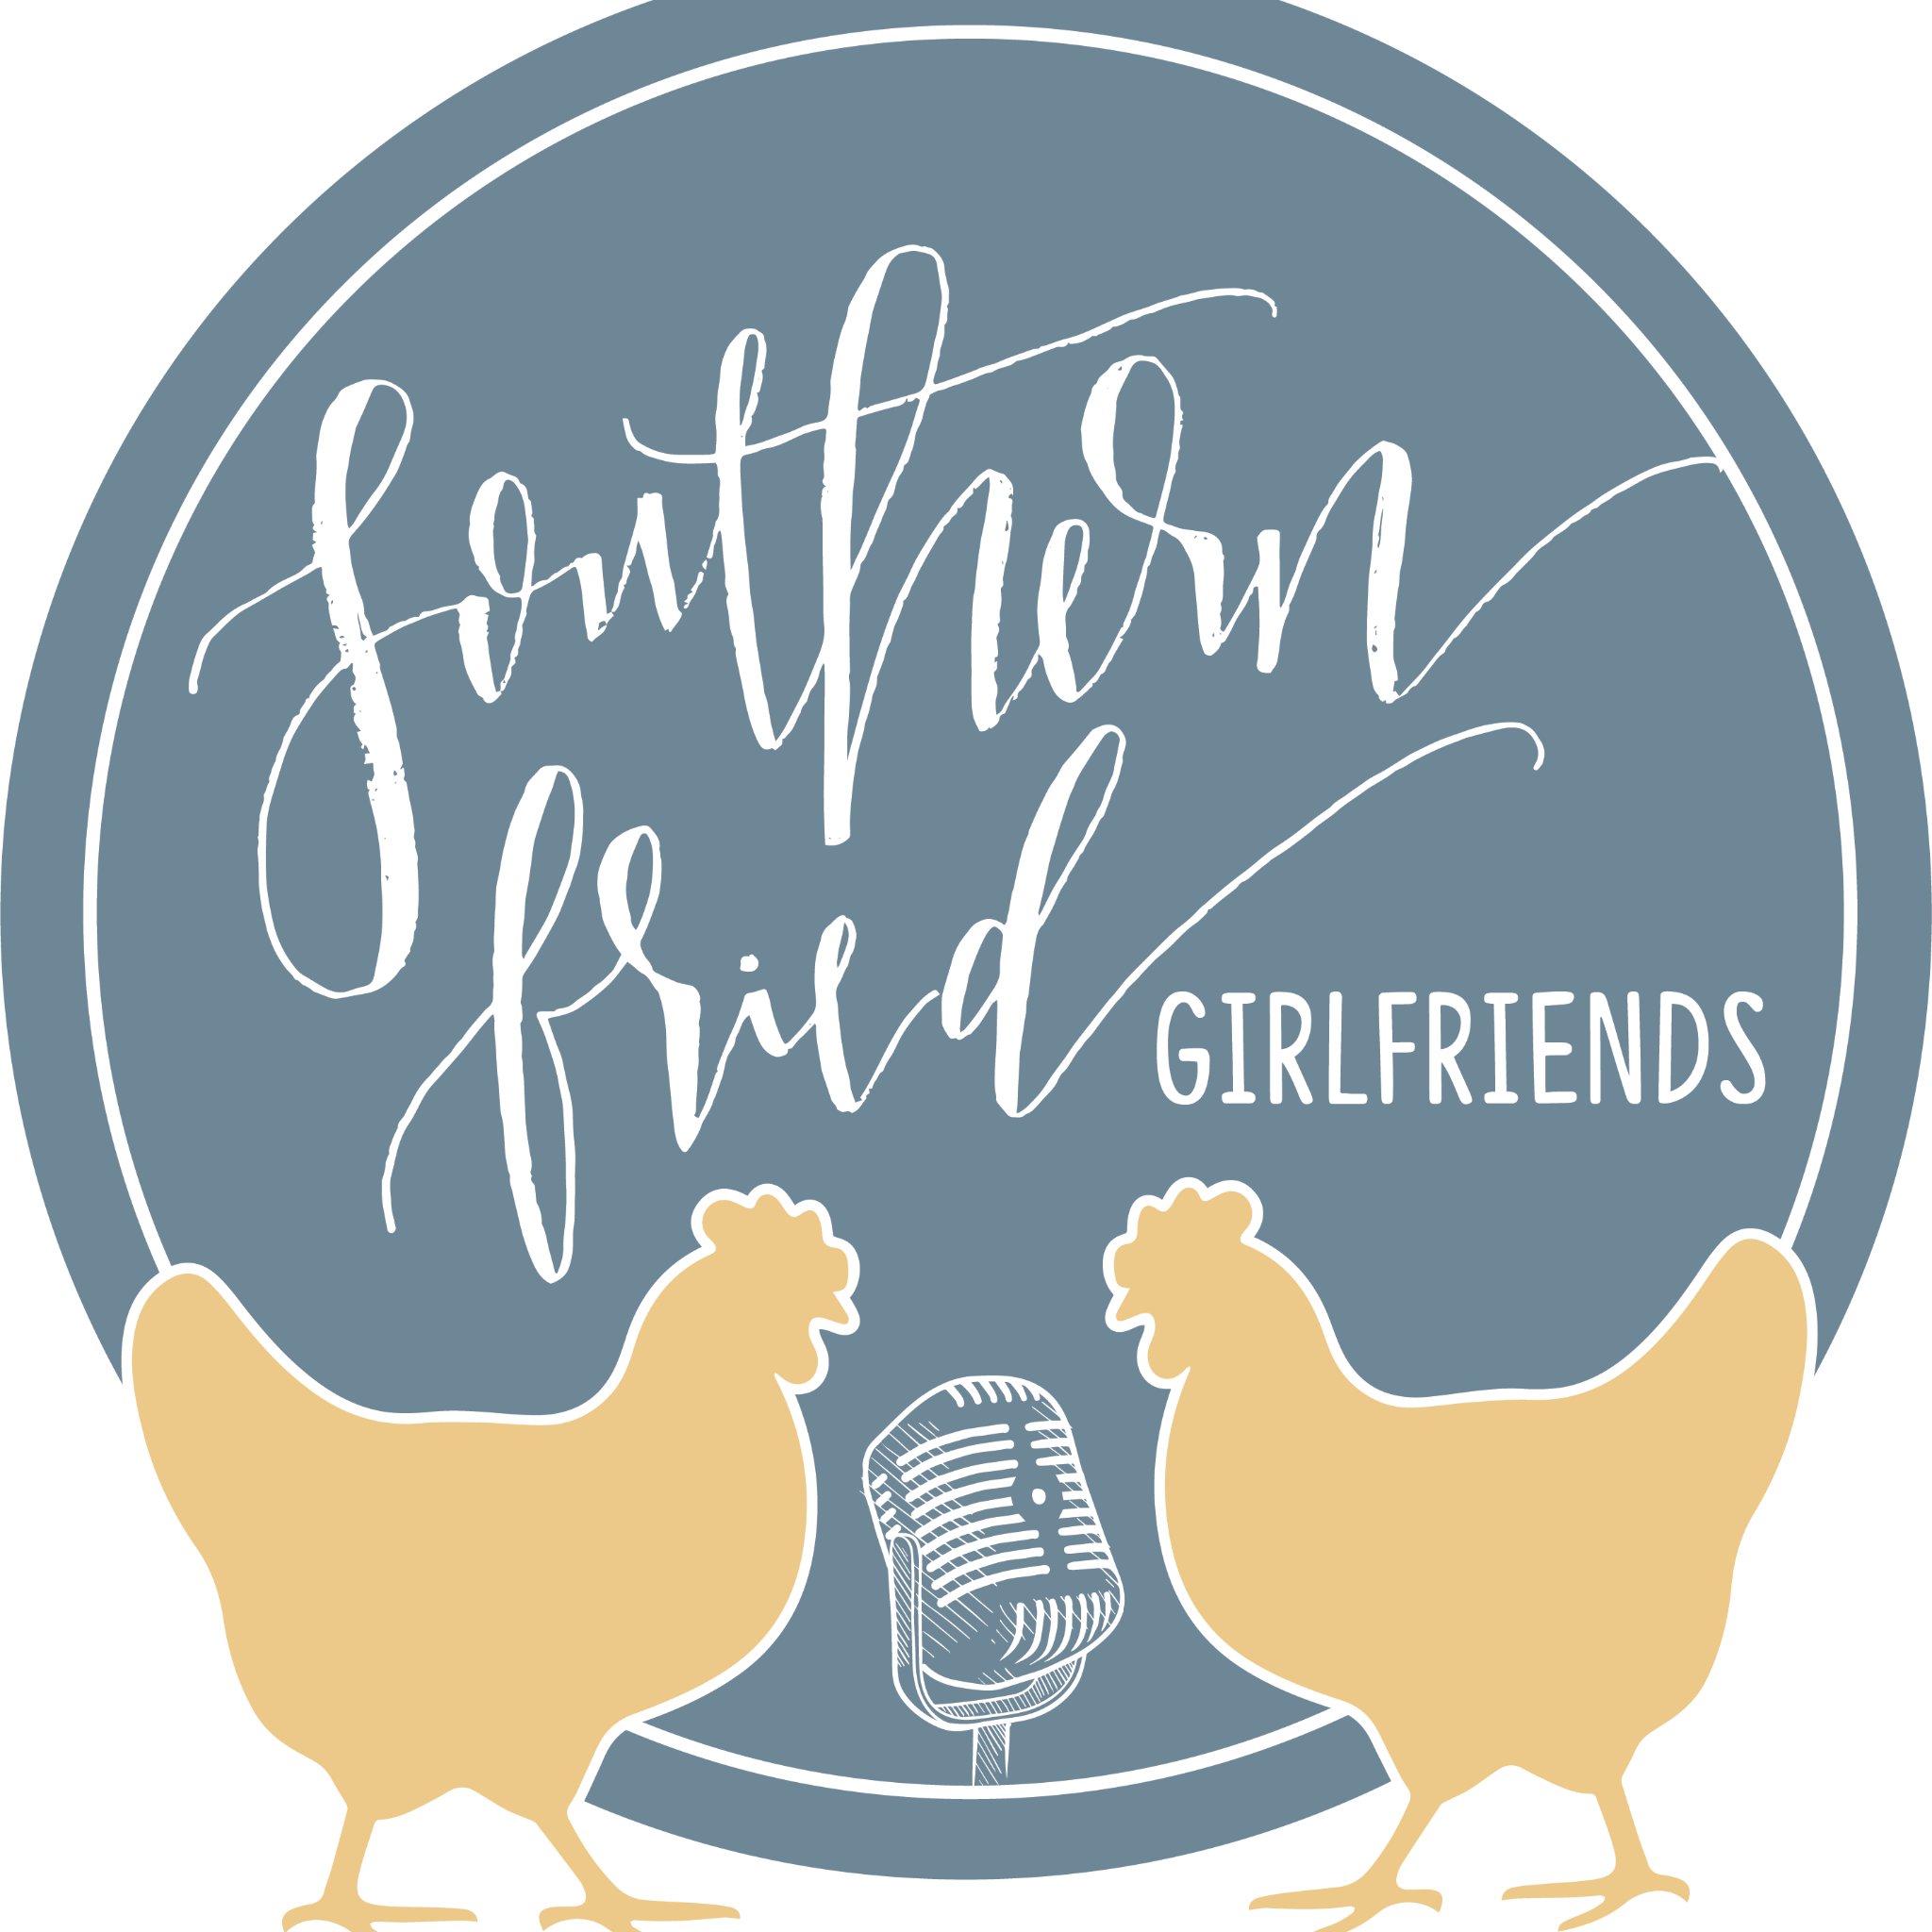 The Southern Fried Girlfriends Podcast is a show by girlfriends for girlfriends from a registered dietitian nutritionist and her foodie girlfriend.